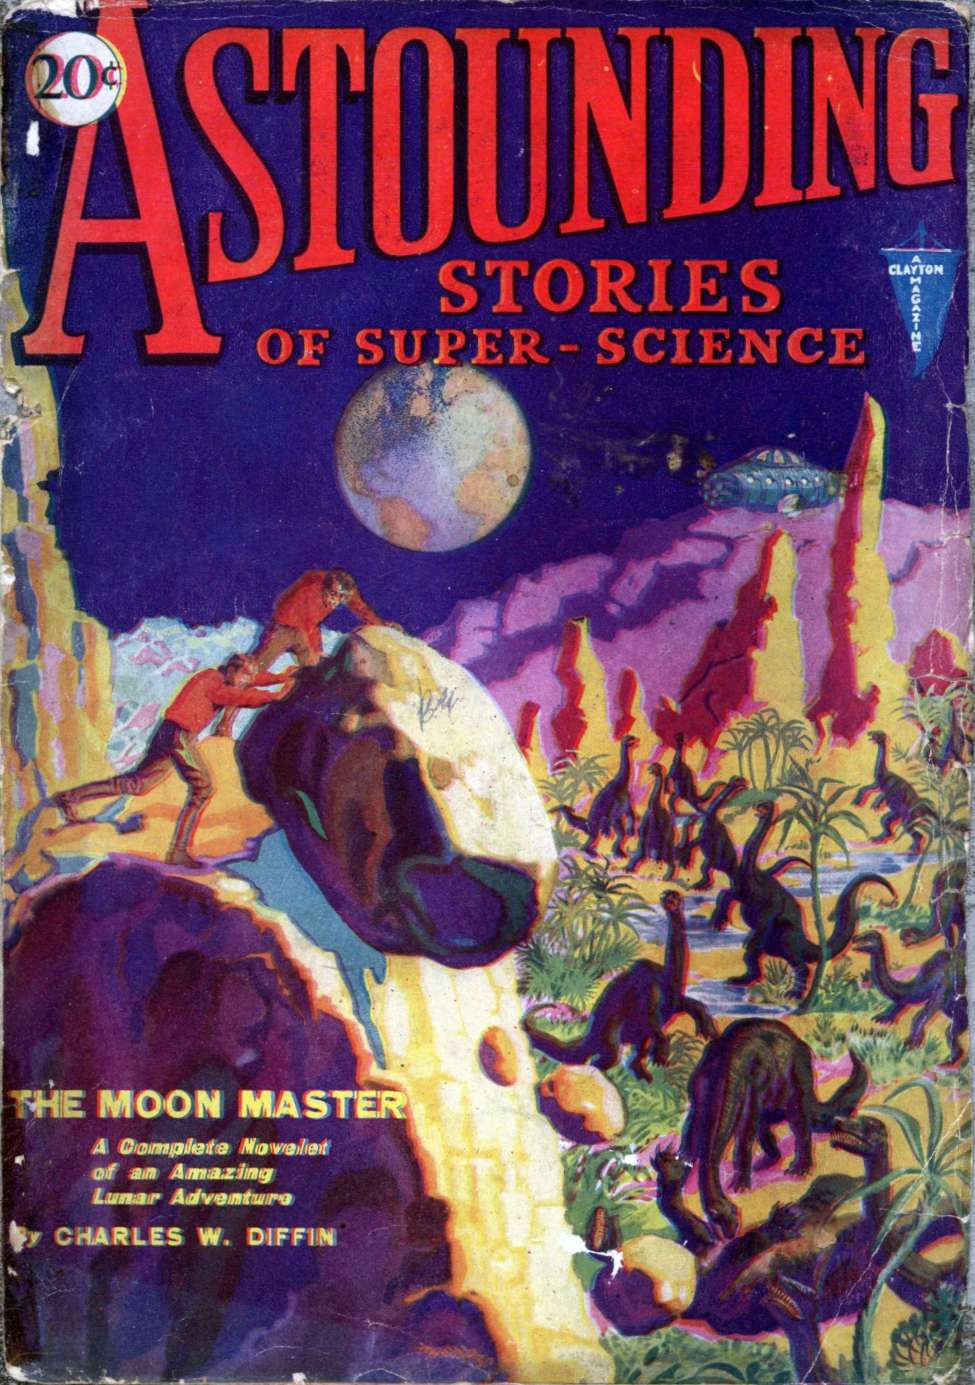 Book Cover For Astounding v2 3 - The Moon Master - Charles W. Diffin